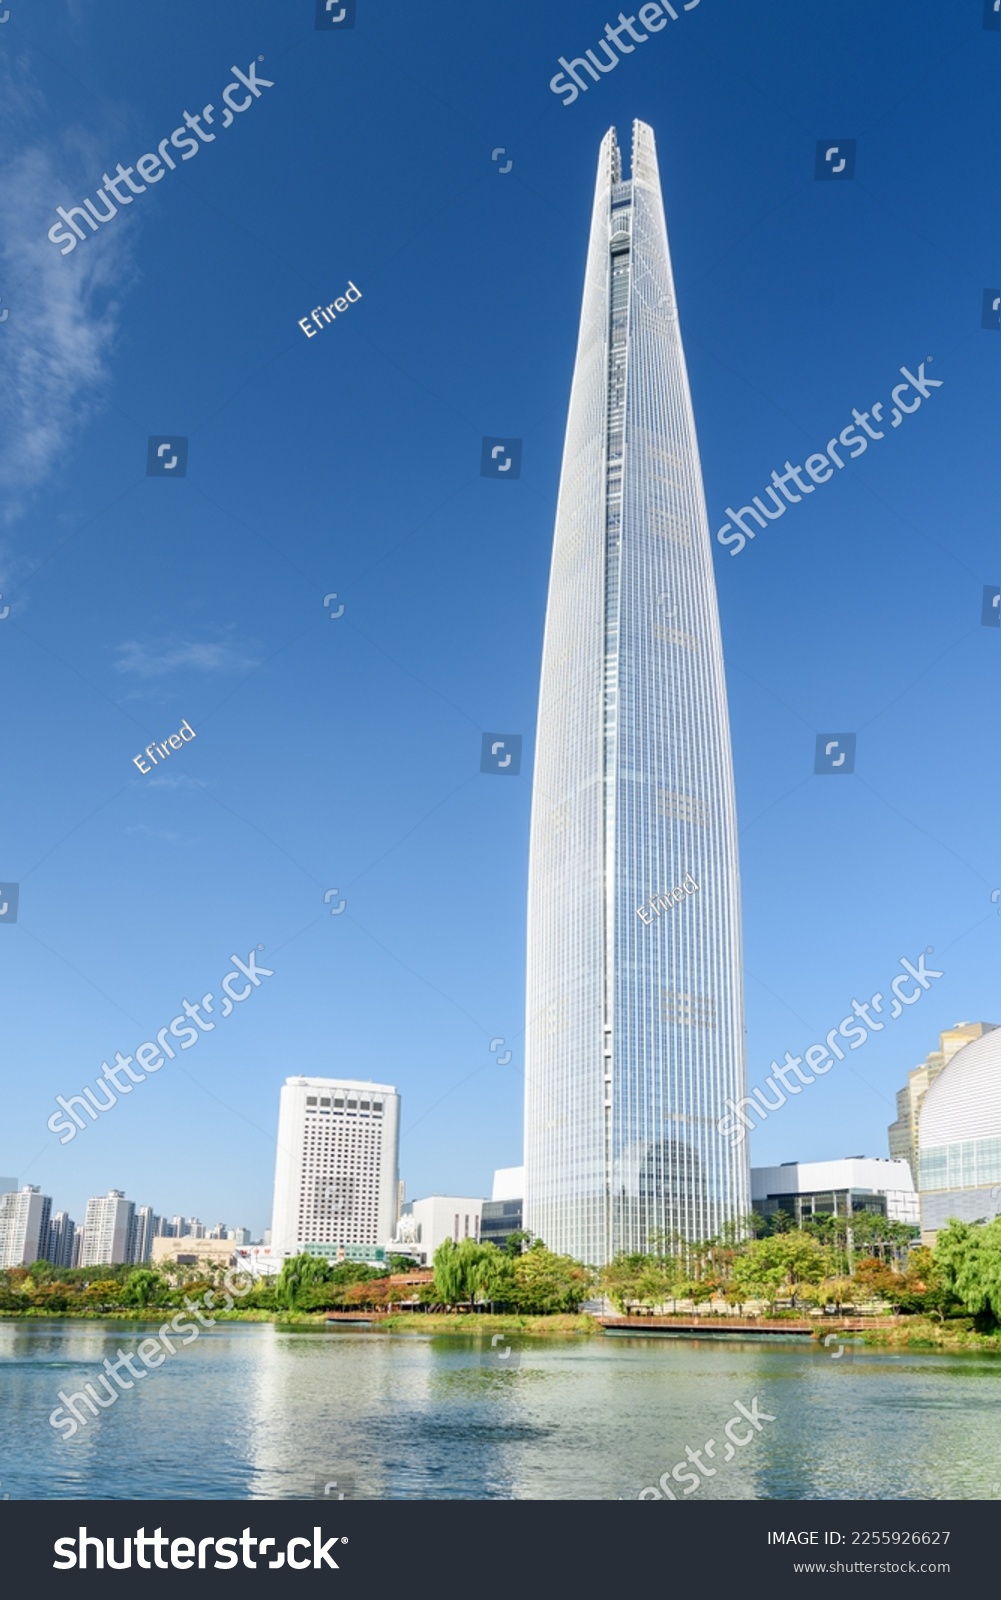 Beautiful view of skyscraper by lake at downtown of Seoul, South Korea. Amazing modern tower on blue sky background. Wonderful sunny cityscape. Seoul is a popular tourist destination of Asia. #2255926627